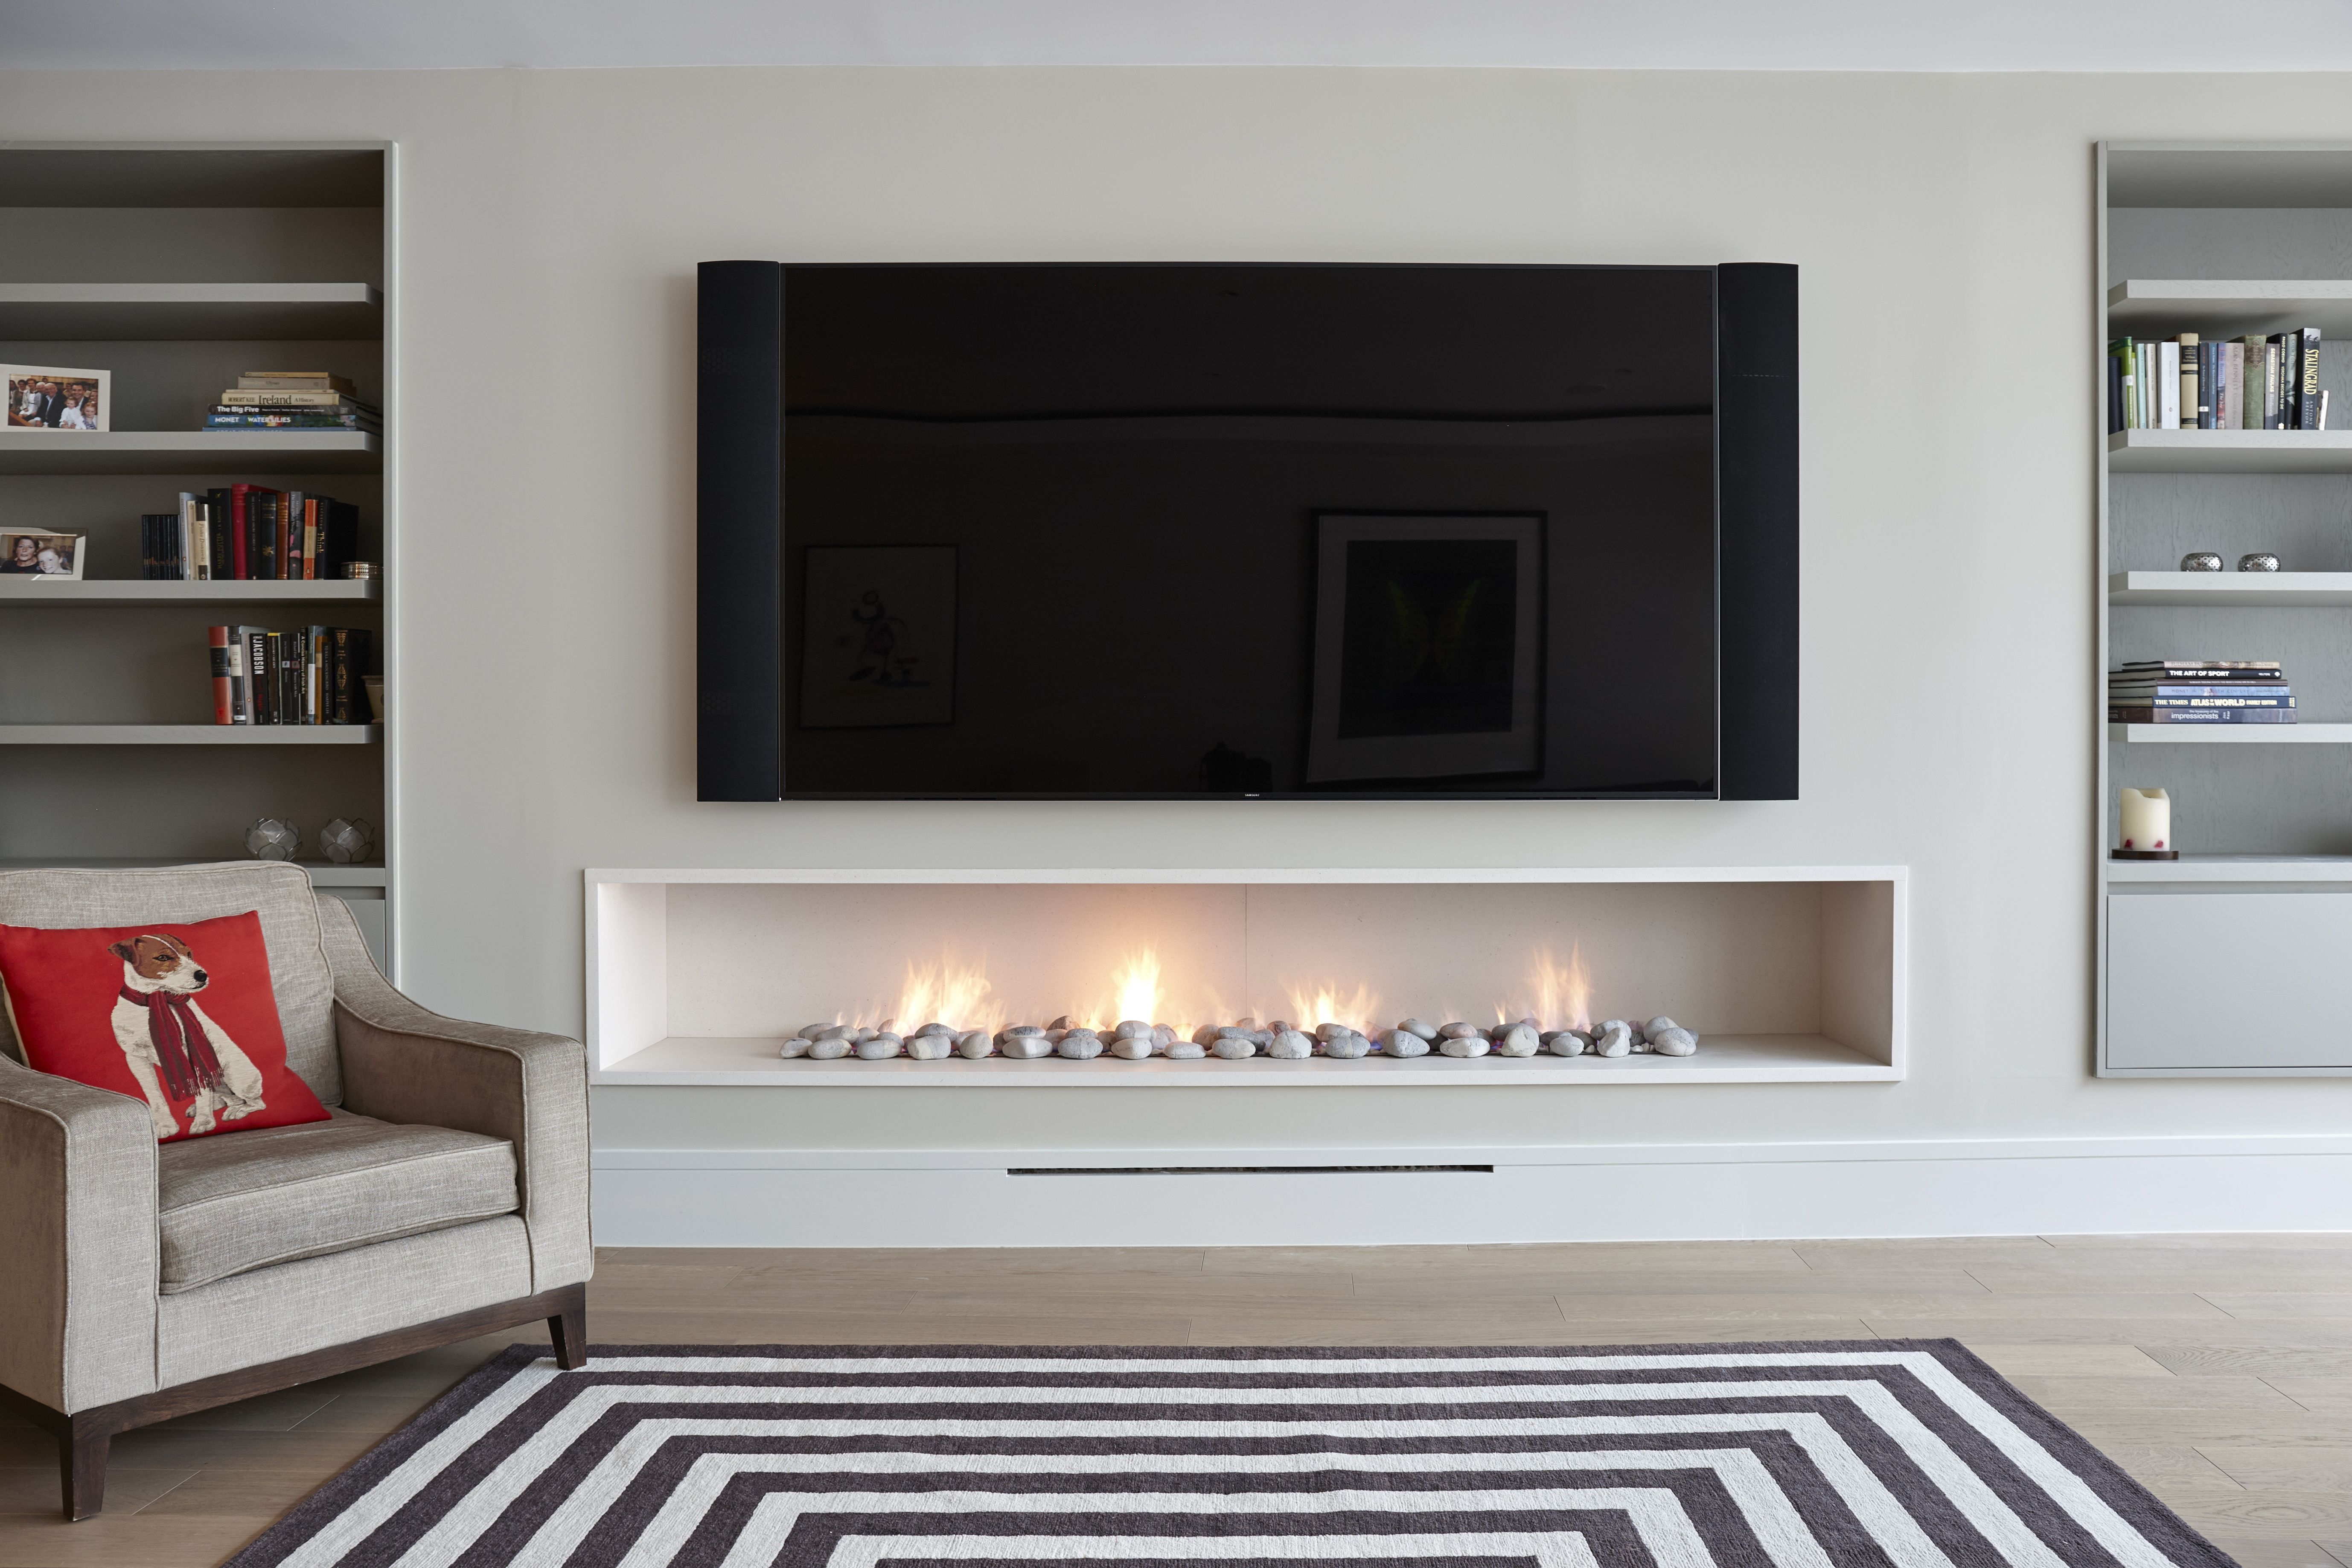 Cool Electric Fireplace Designs Ideas For Living Room01 – ZYHOMY